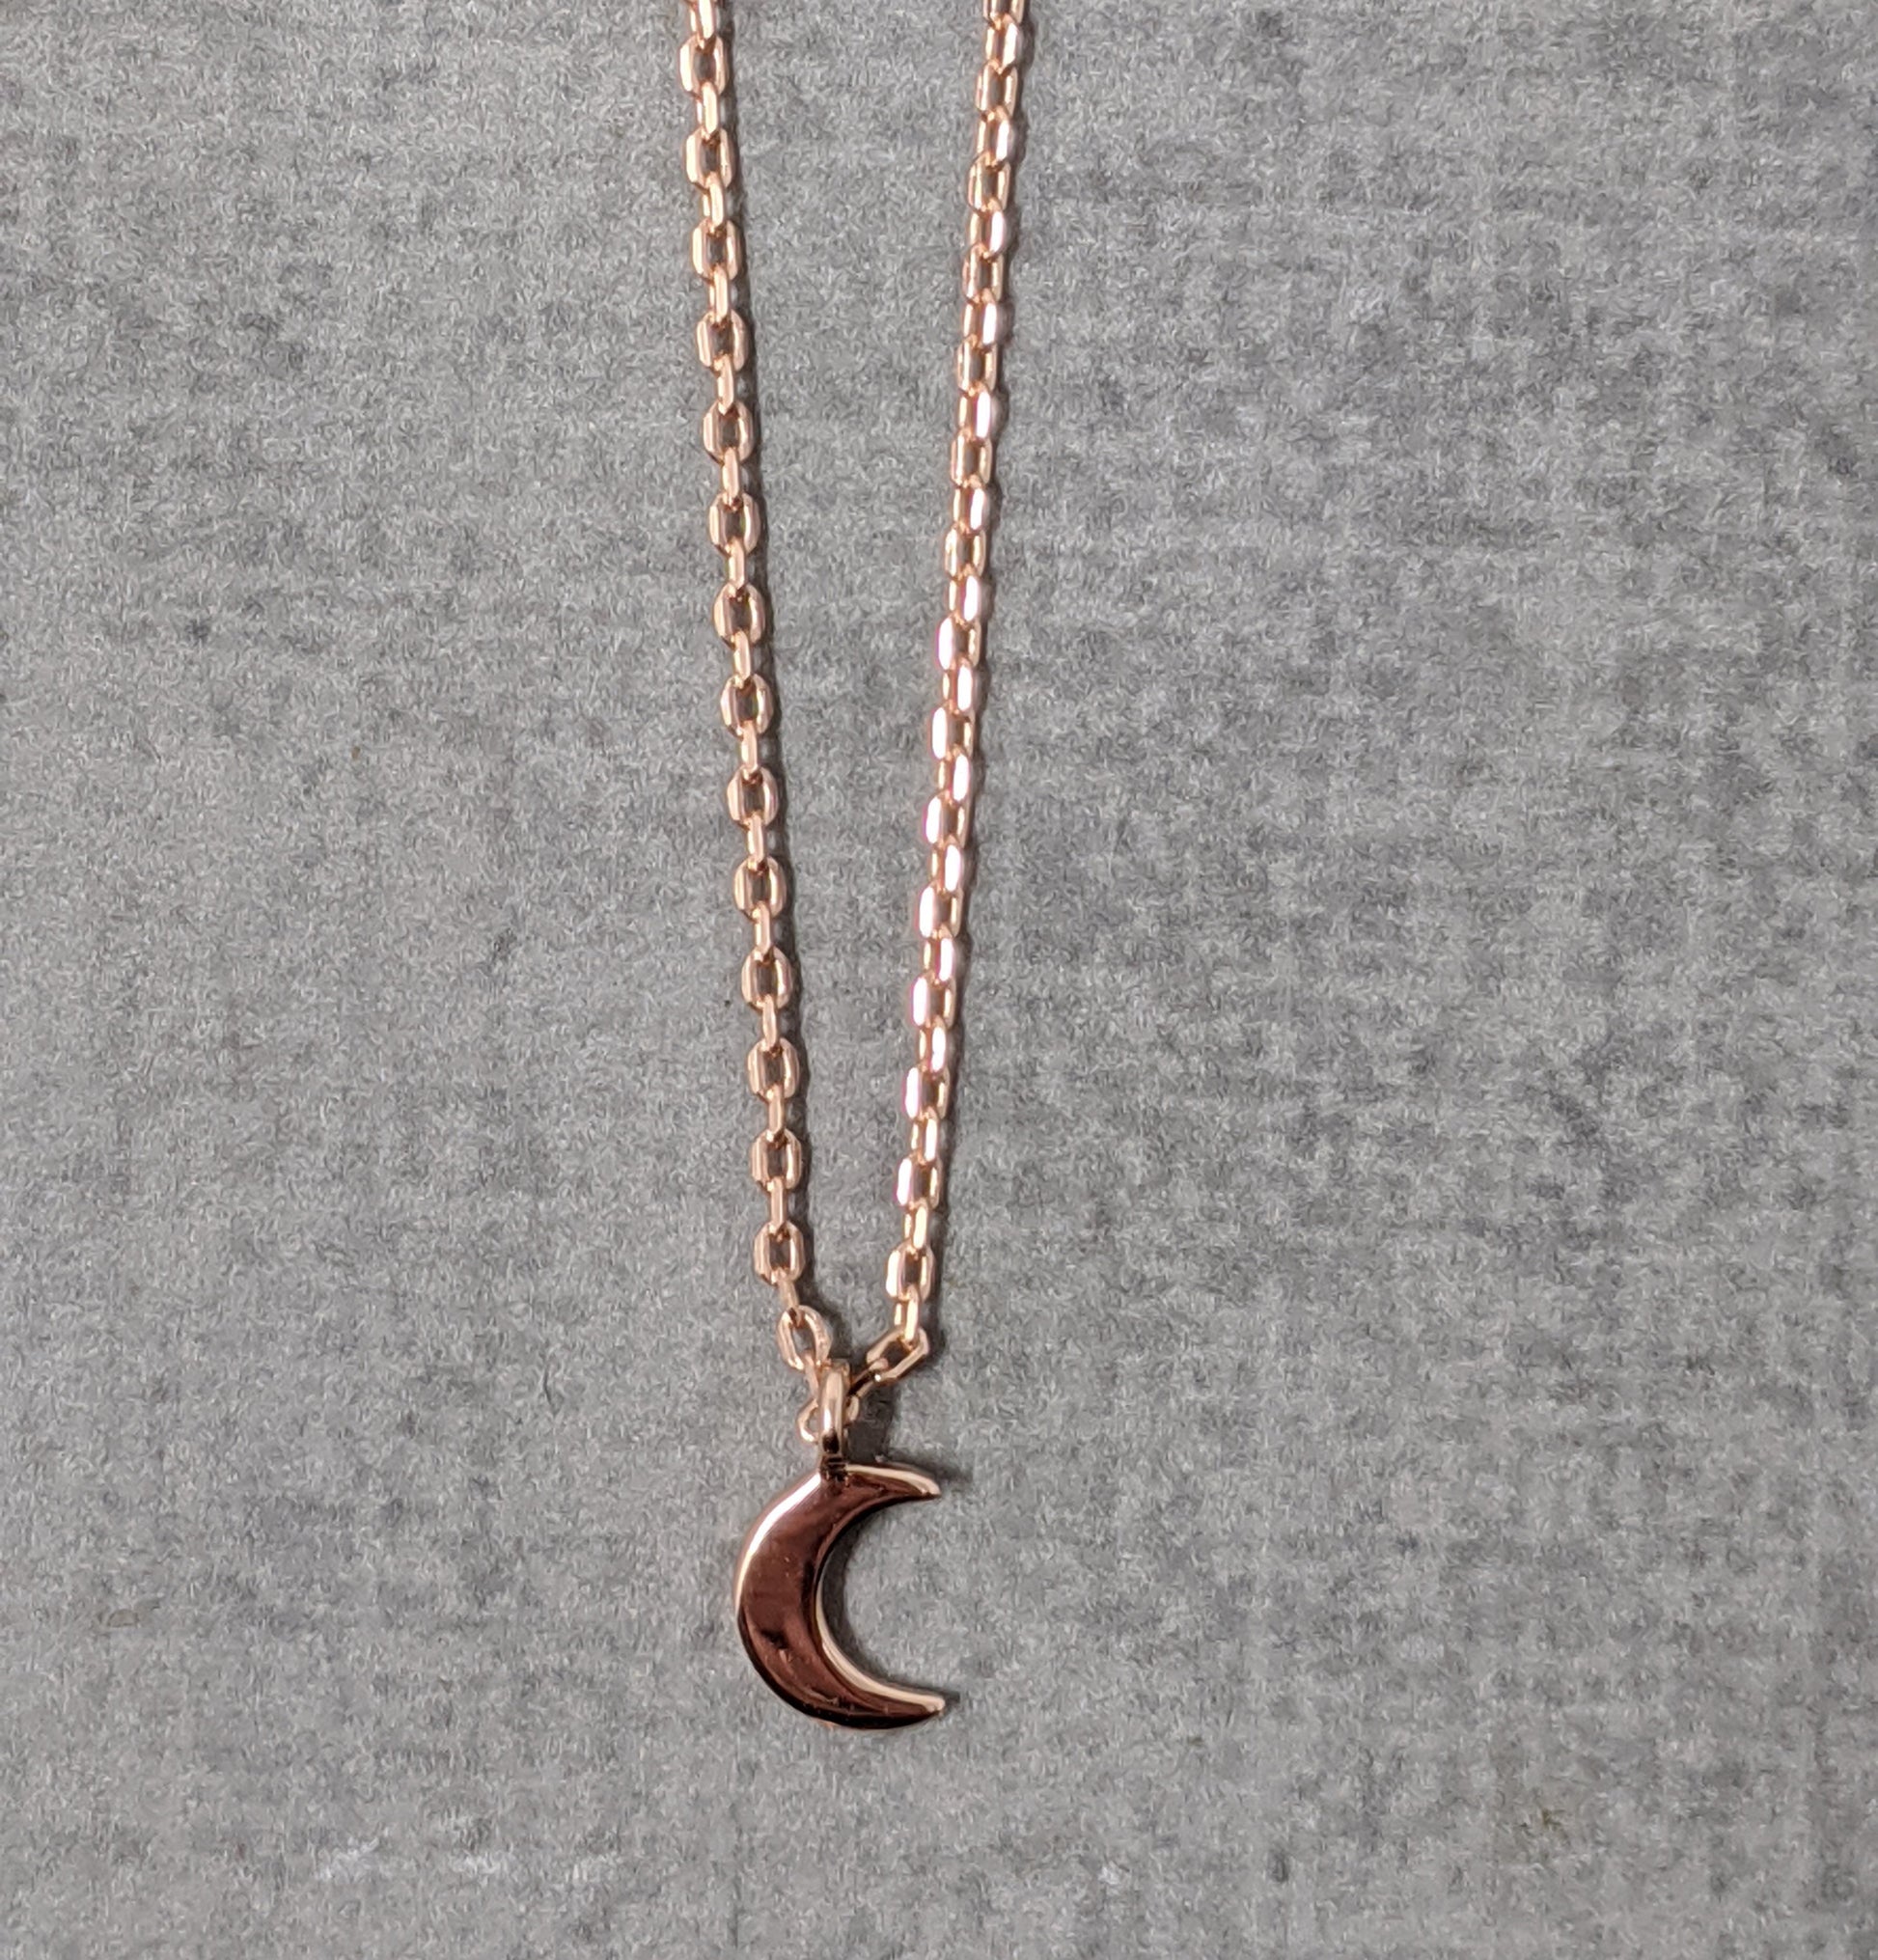 rose gold moon necklace